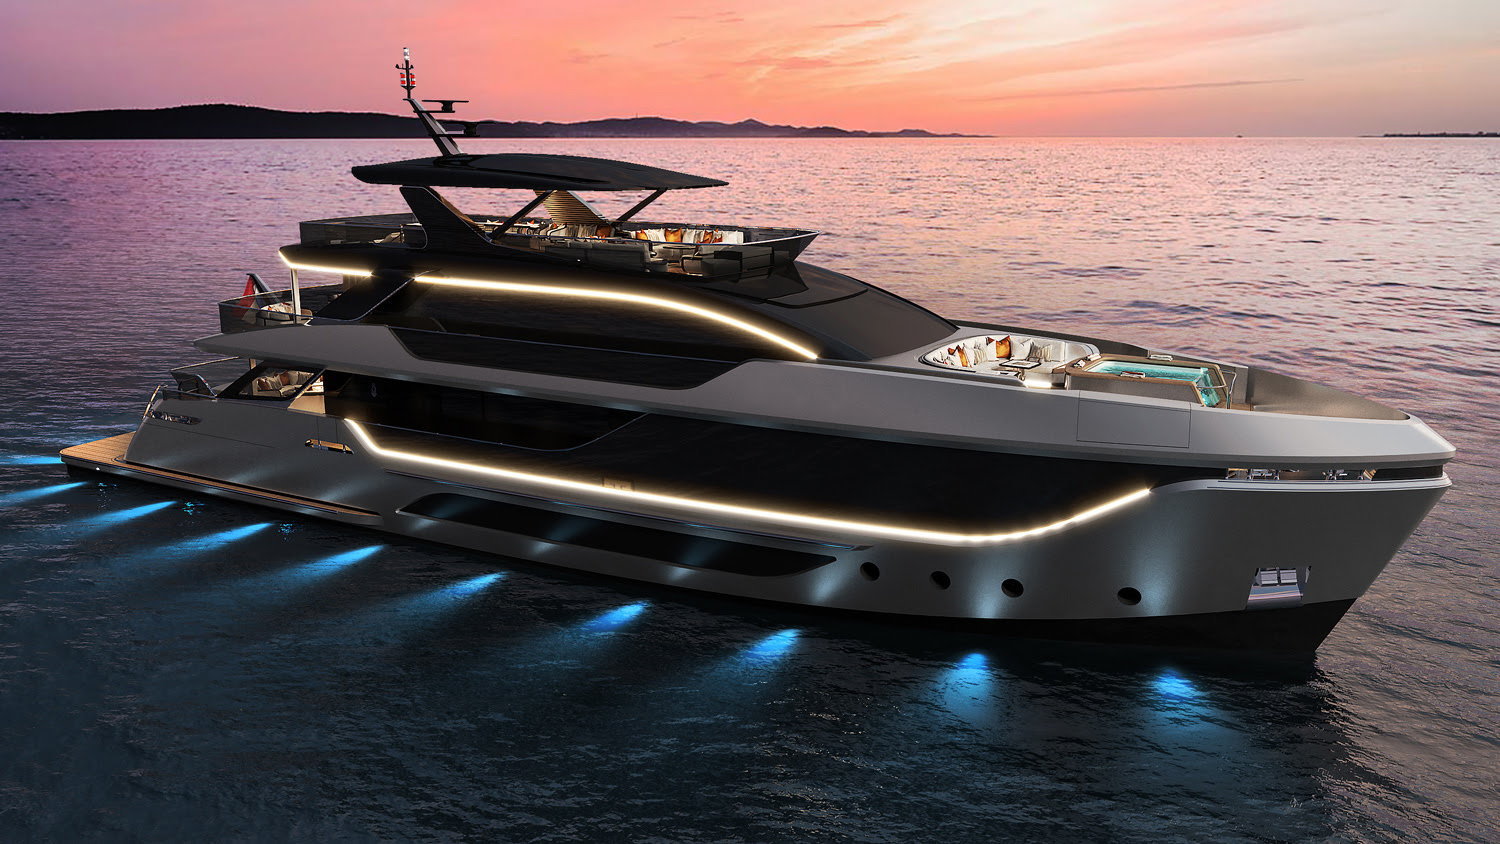 Your World, Your Yacht - This is all possible with Dutch builder Van der Valk